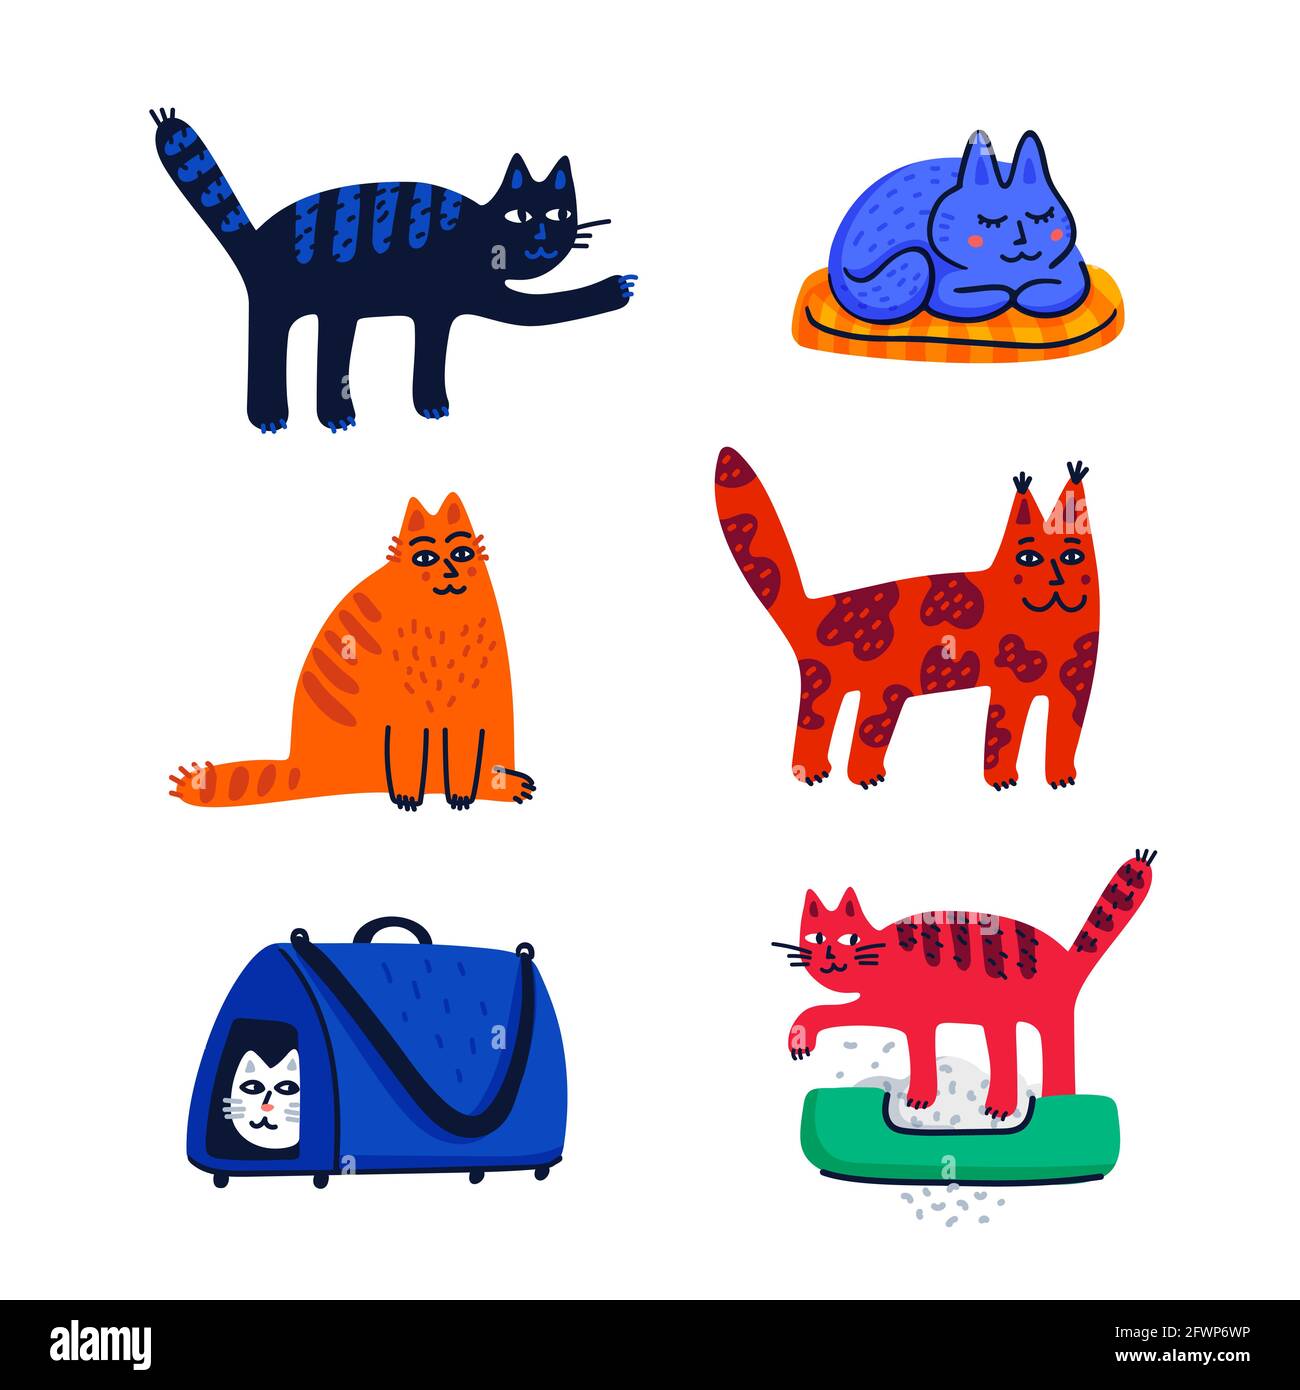 Pet grooming concept. Set of cartoon cats with different colored fur and markings standing sitting or walking. Cat care, grooming, hygiene, health Stock Vector